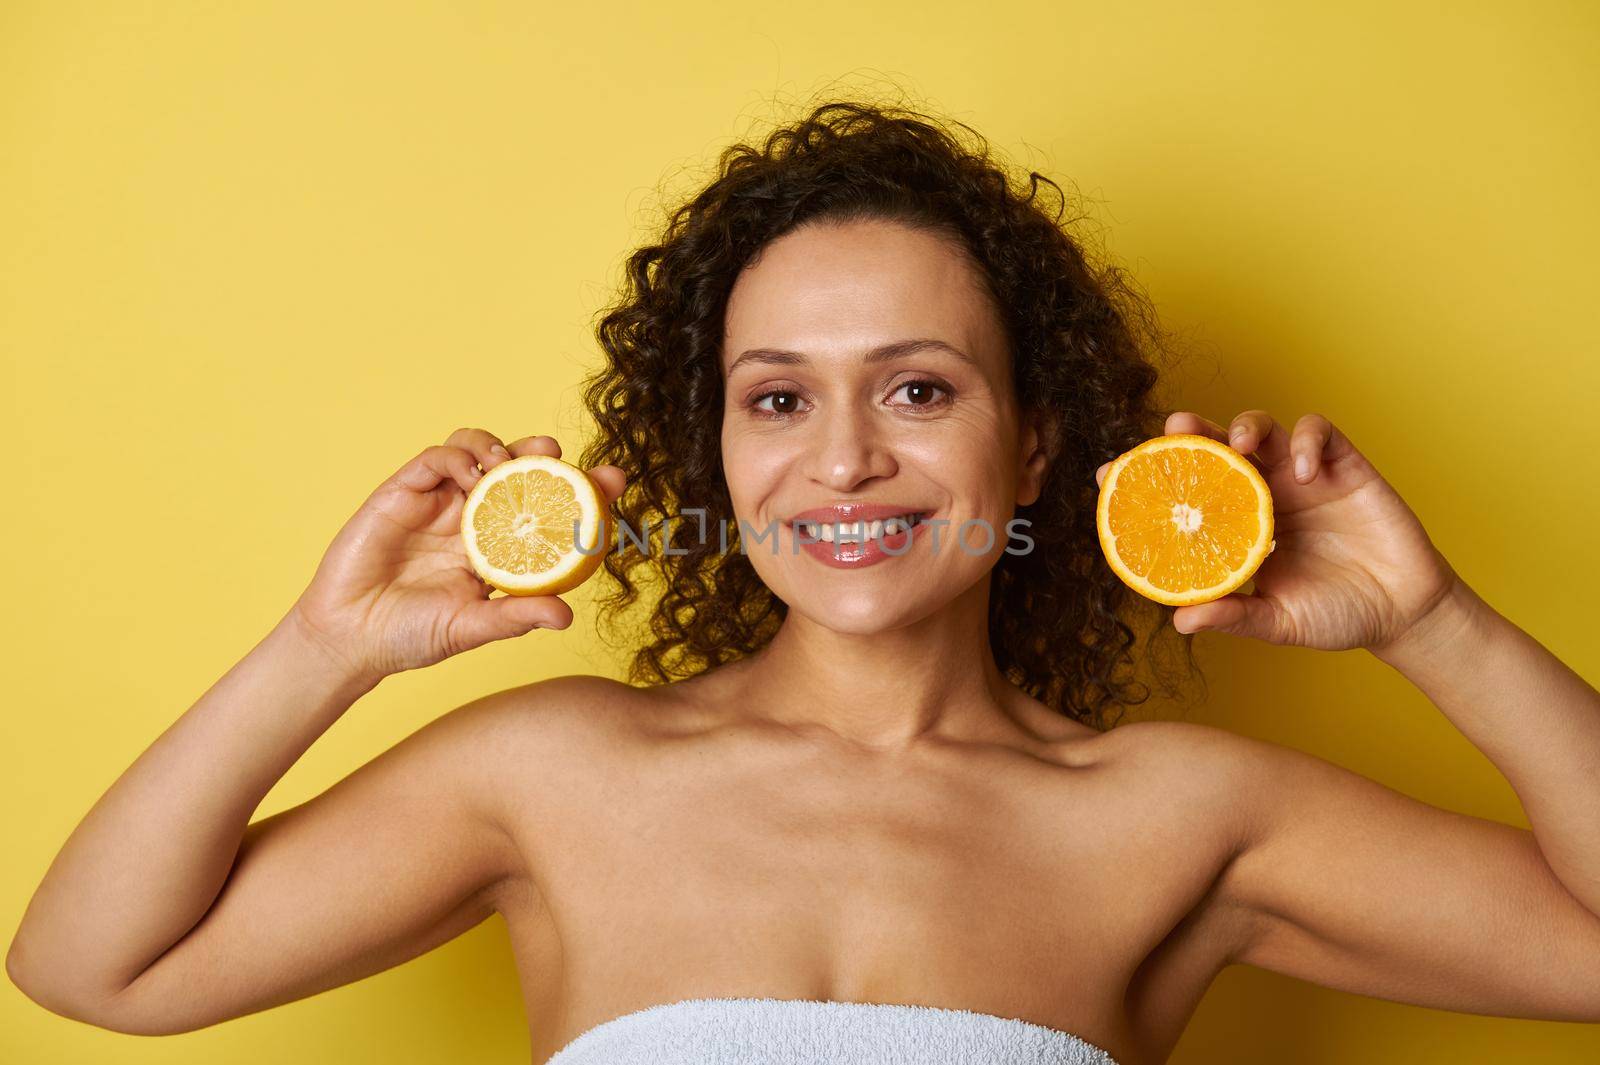 Young woman with a beautiful smile holding halves of orange and lemon near her face by artgf